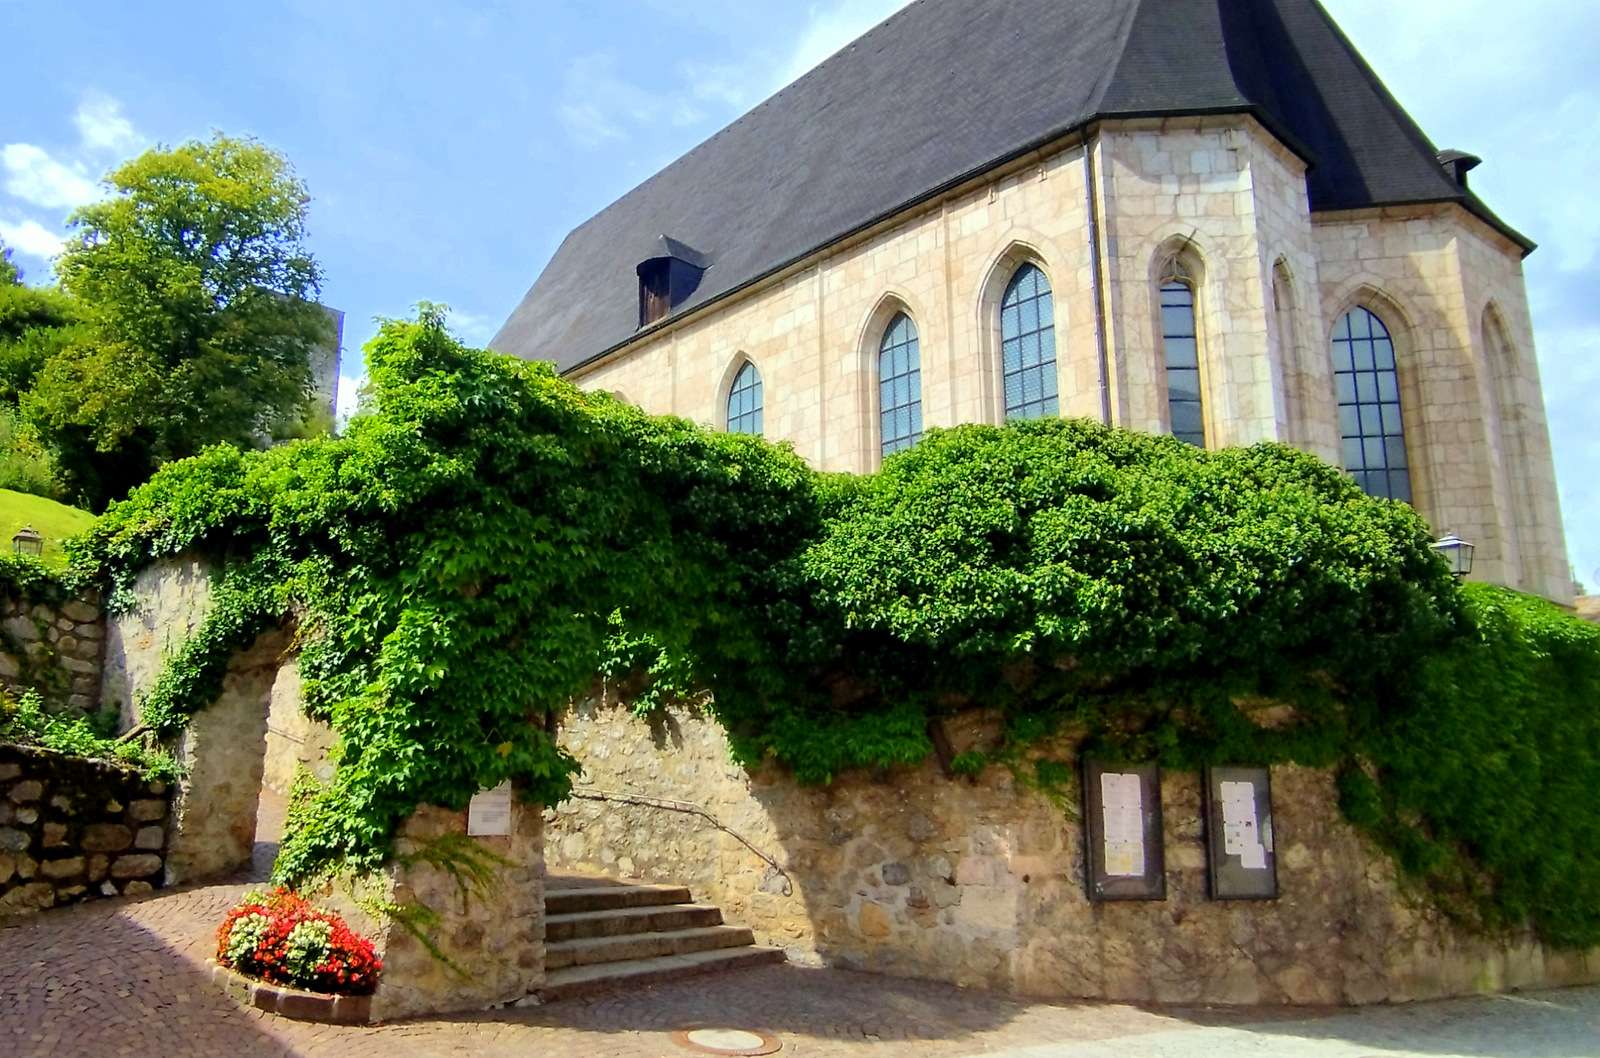 Entrance to the church grounds in Rattenberg online puzzle